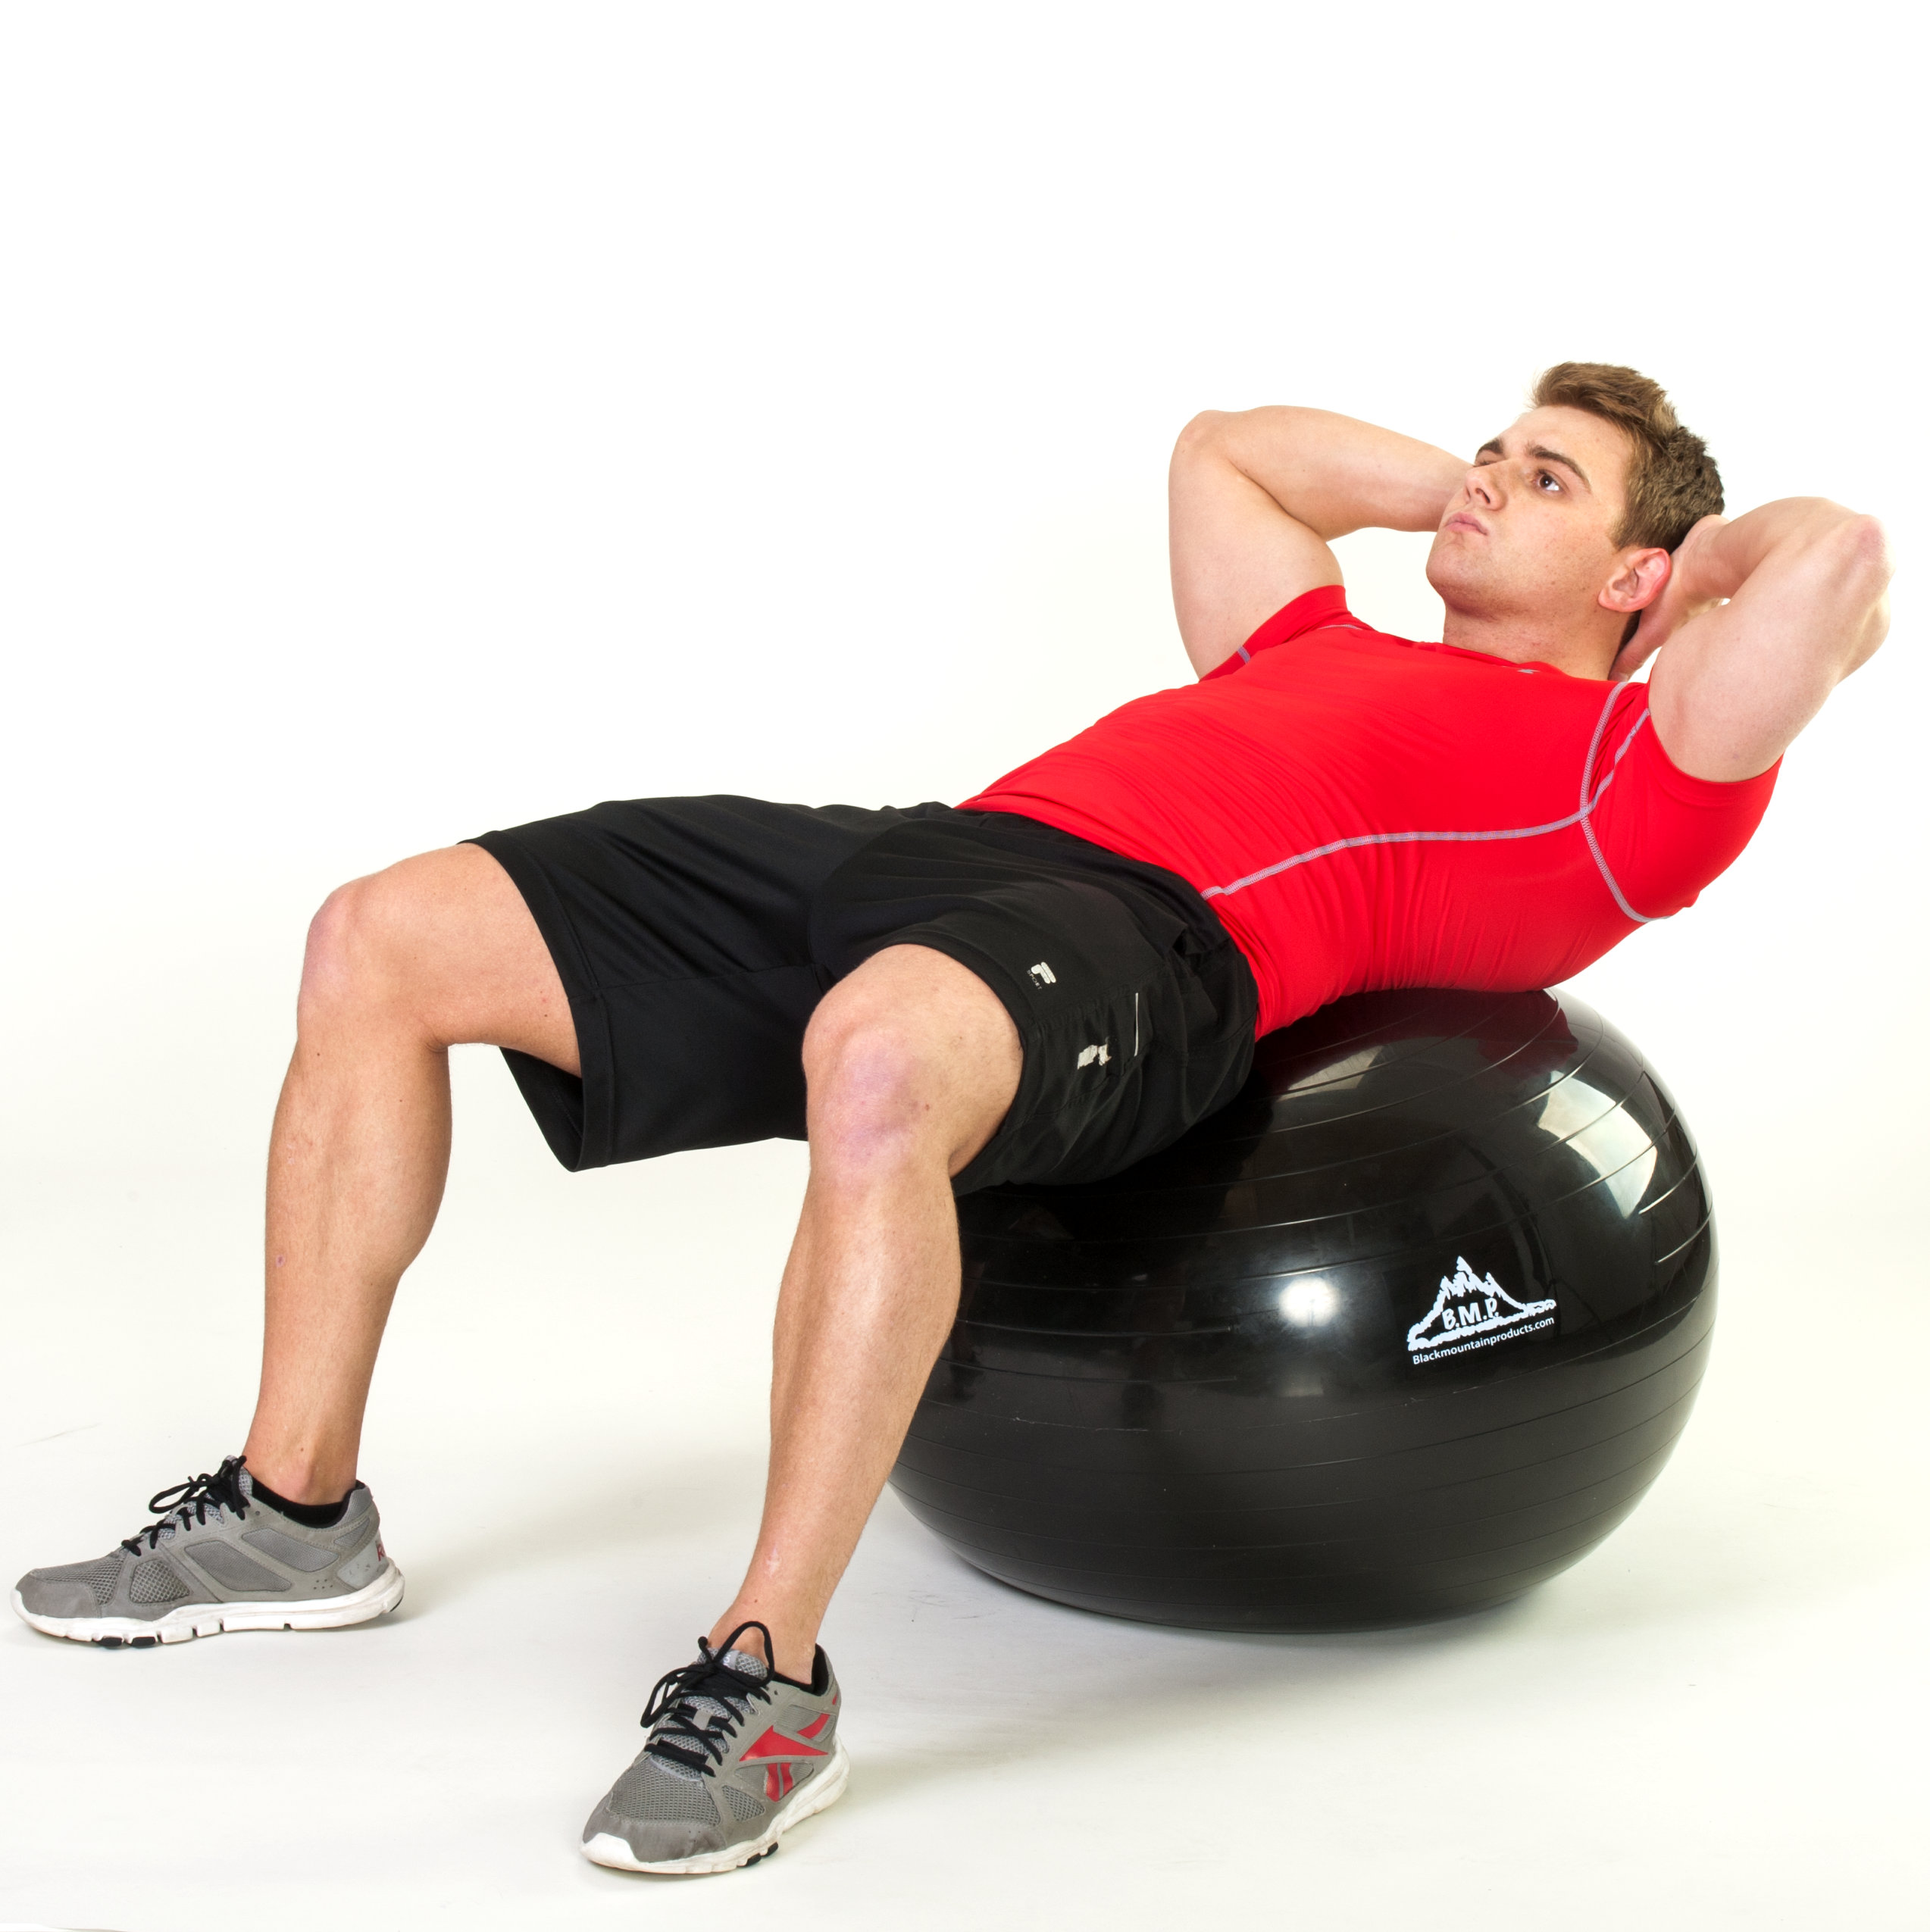 Black Mountain Products 2000 Lbs. Static Strength Exercise Stability Ball with Pump, 45 cm Black - image 2 of 7